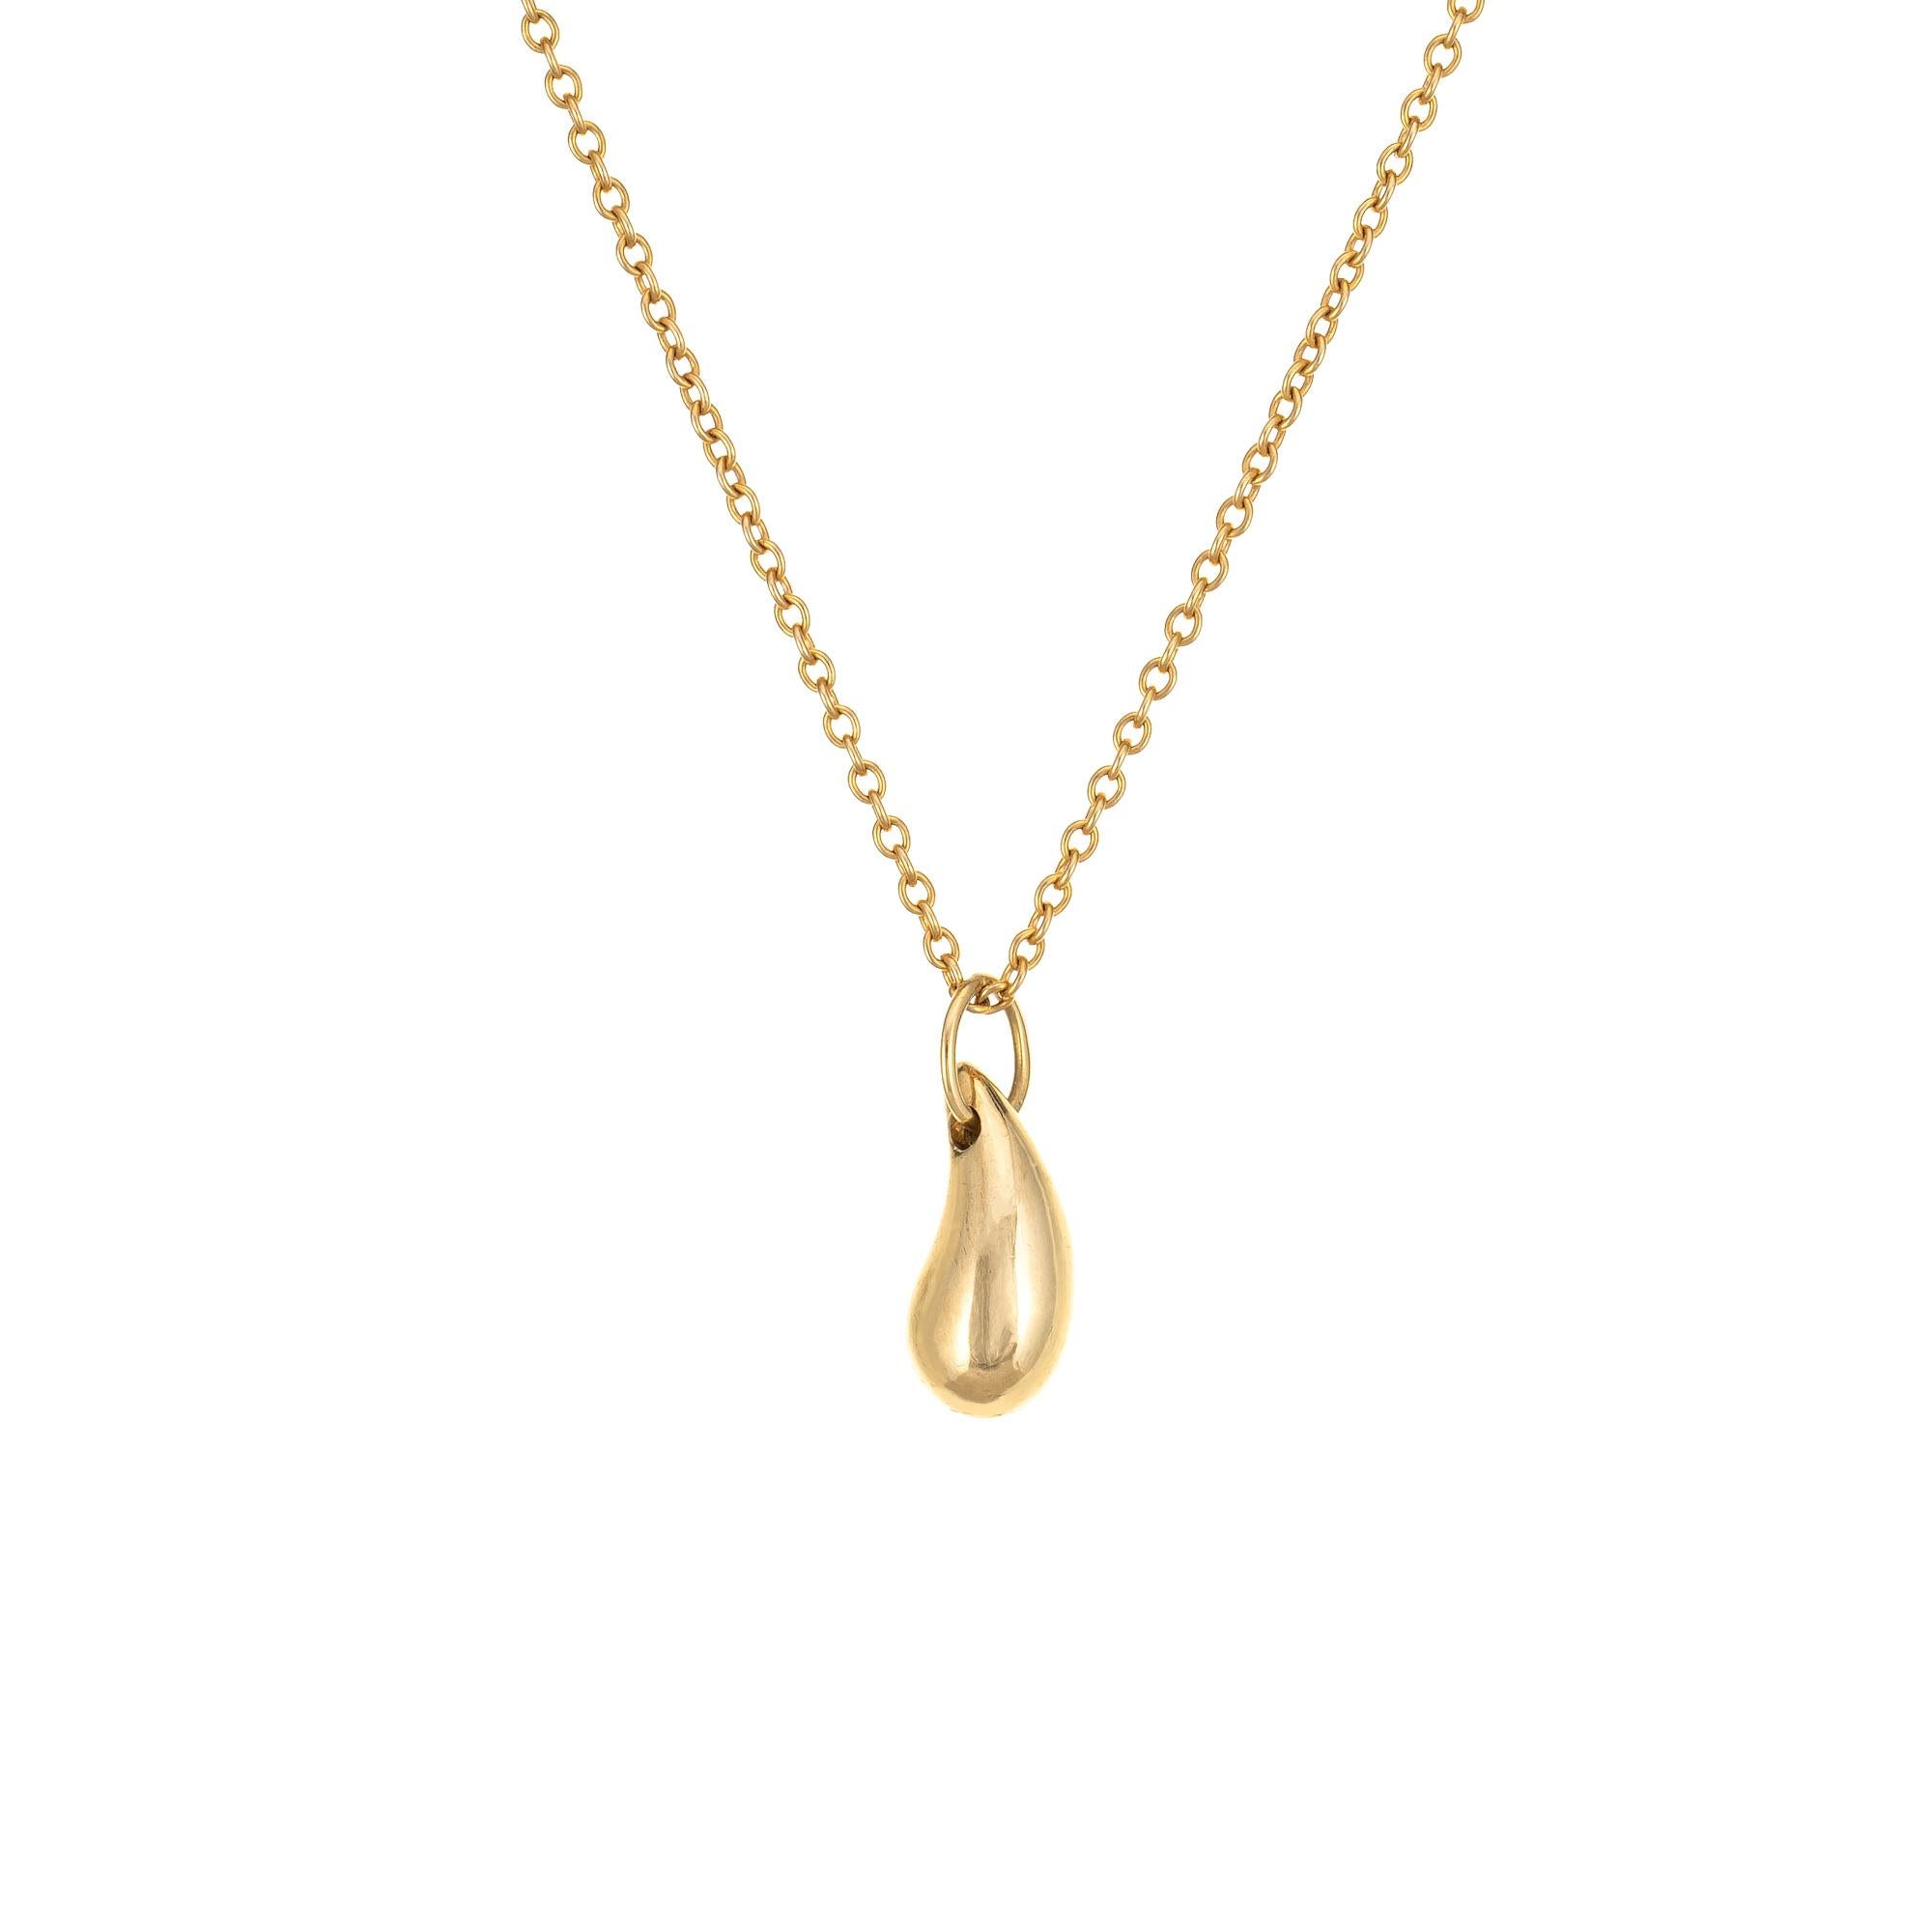 Stylish vintage Tiffany & Co heart teardrop necklace, crafted in 18 karat yellow gold (circa 1980s).  

The teardrop is a classic design by Elsa Peretti. Small in scale, the teardrop is designed to resemble a solitary raindrop or shining bead of